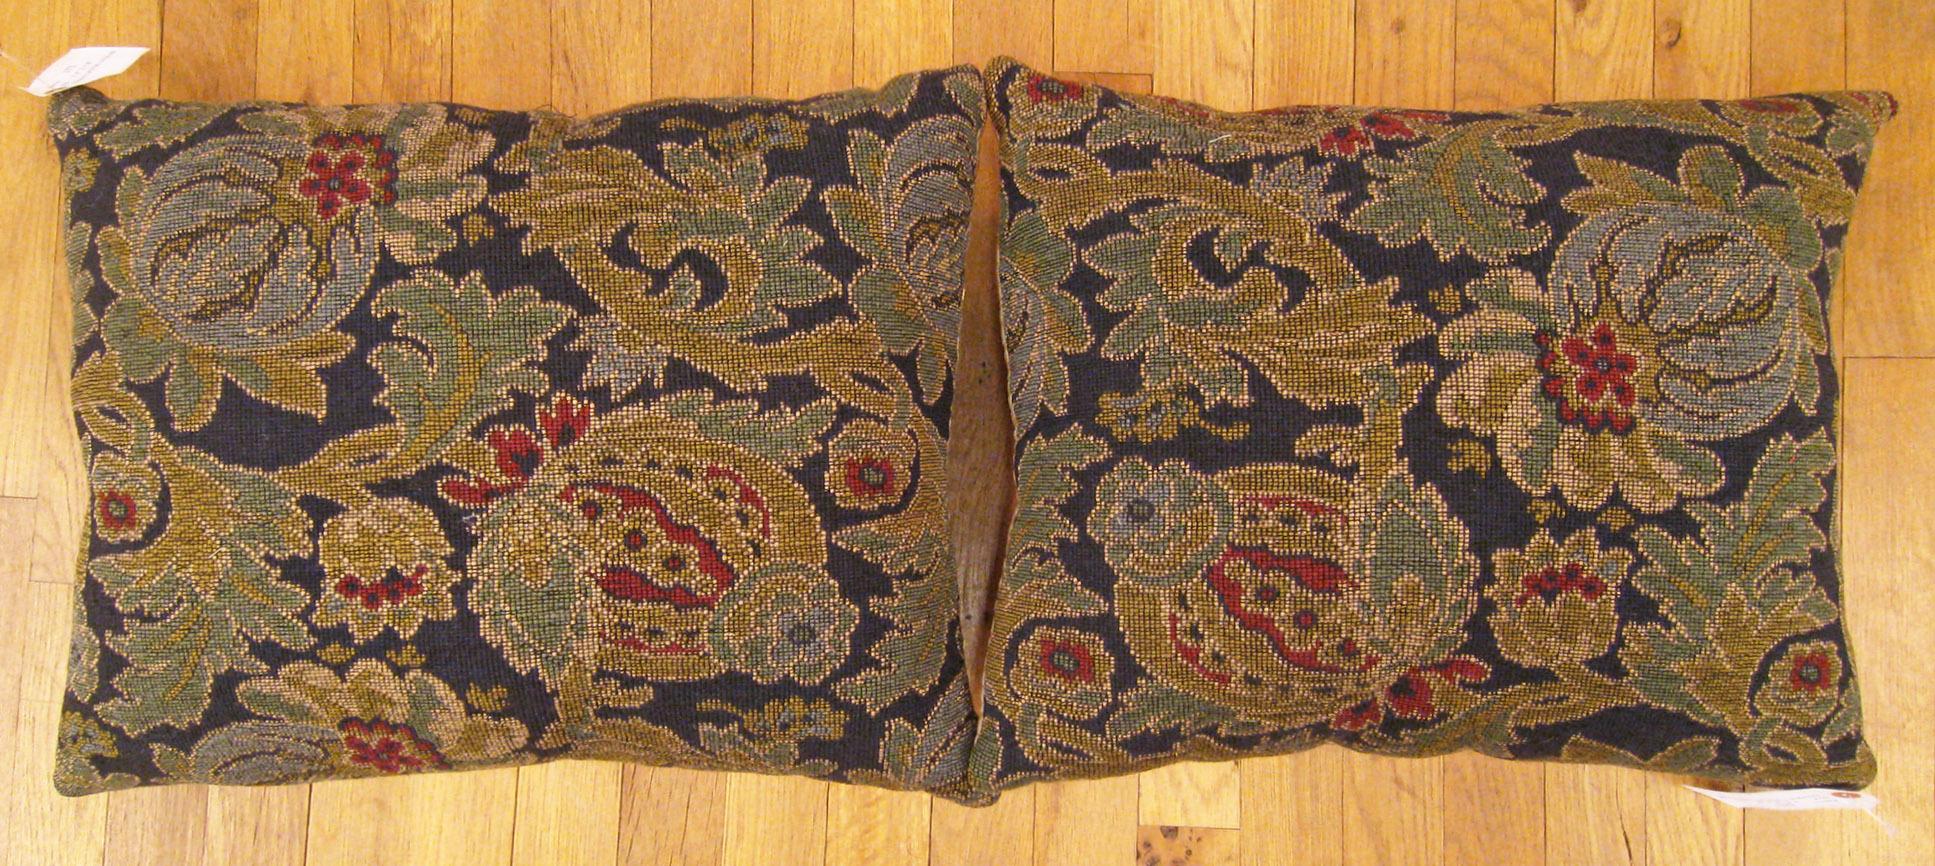 A pair of antique jacquard tapestry pillows ; size 1'5” x 1'8” each.

An antique decorative pillows with floral elements allover a gray green central field, size 1'5